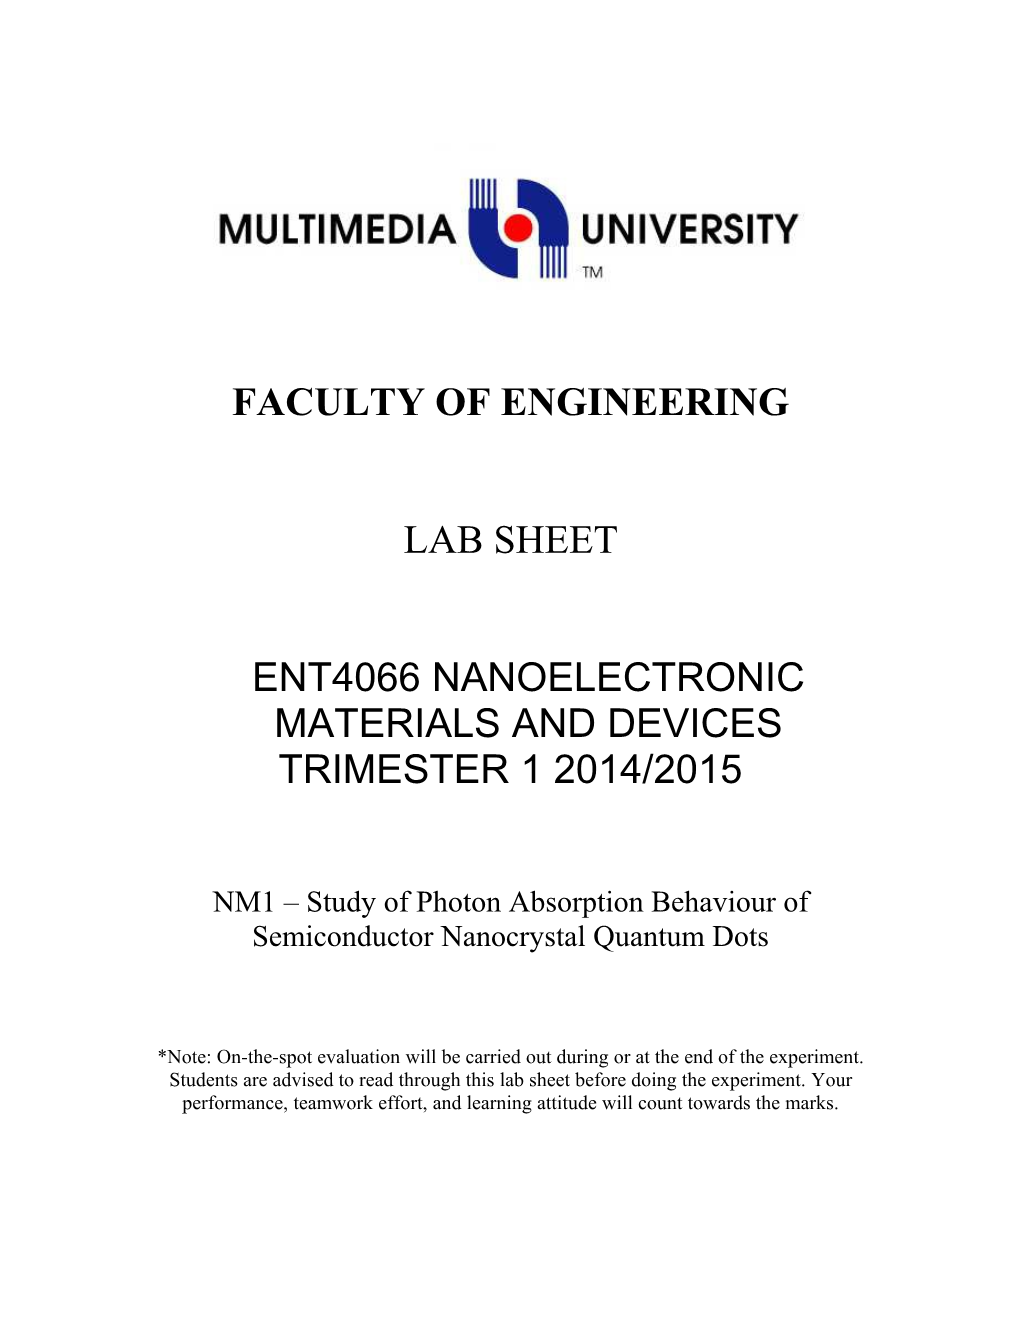 Ent4066 Nanoelectronic Materials and Devices